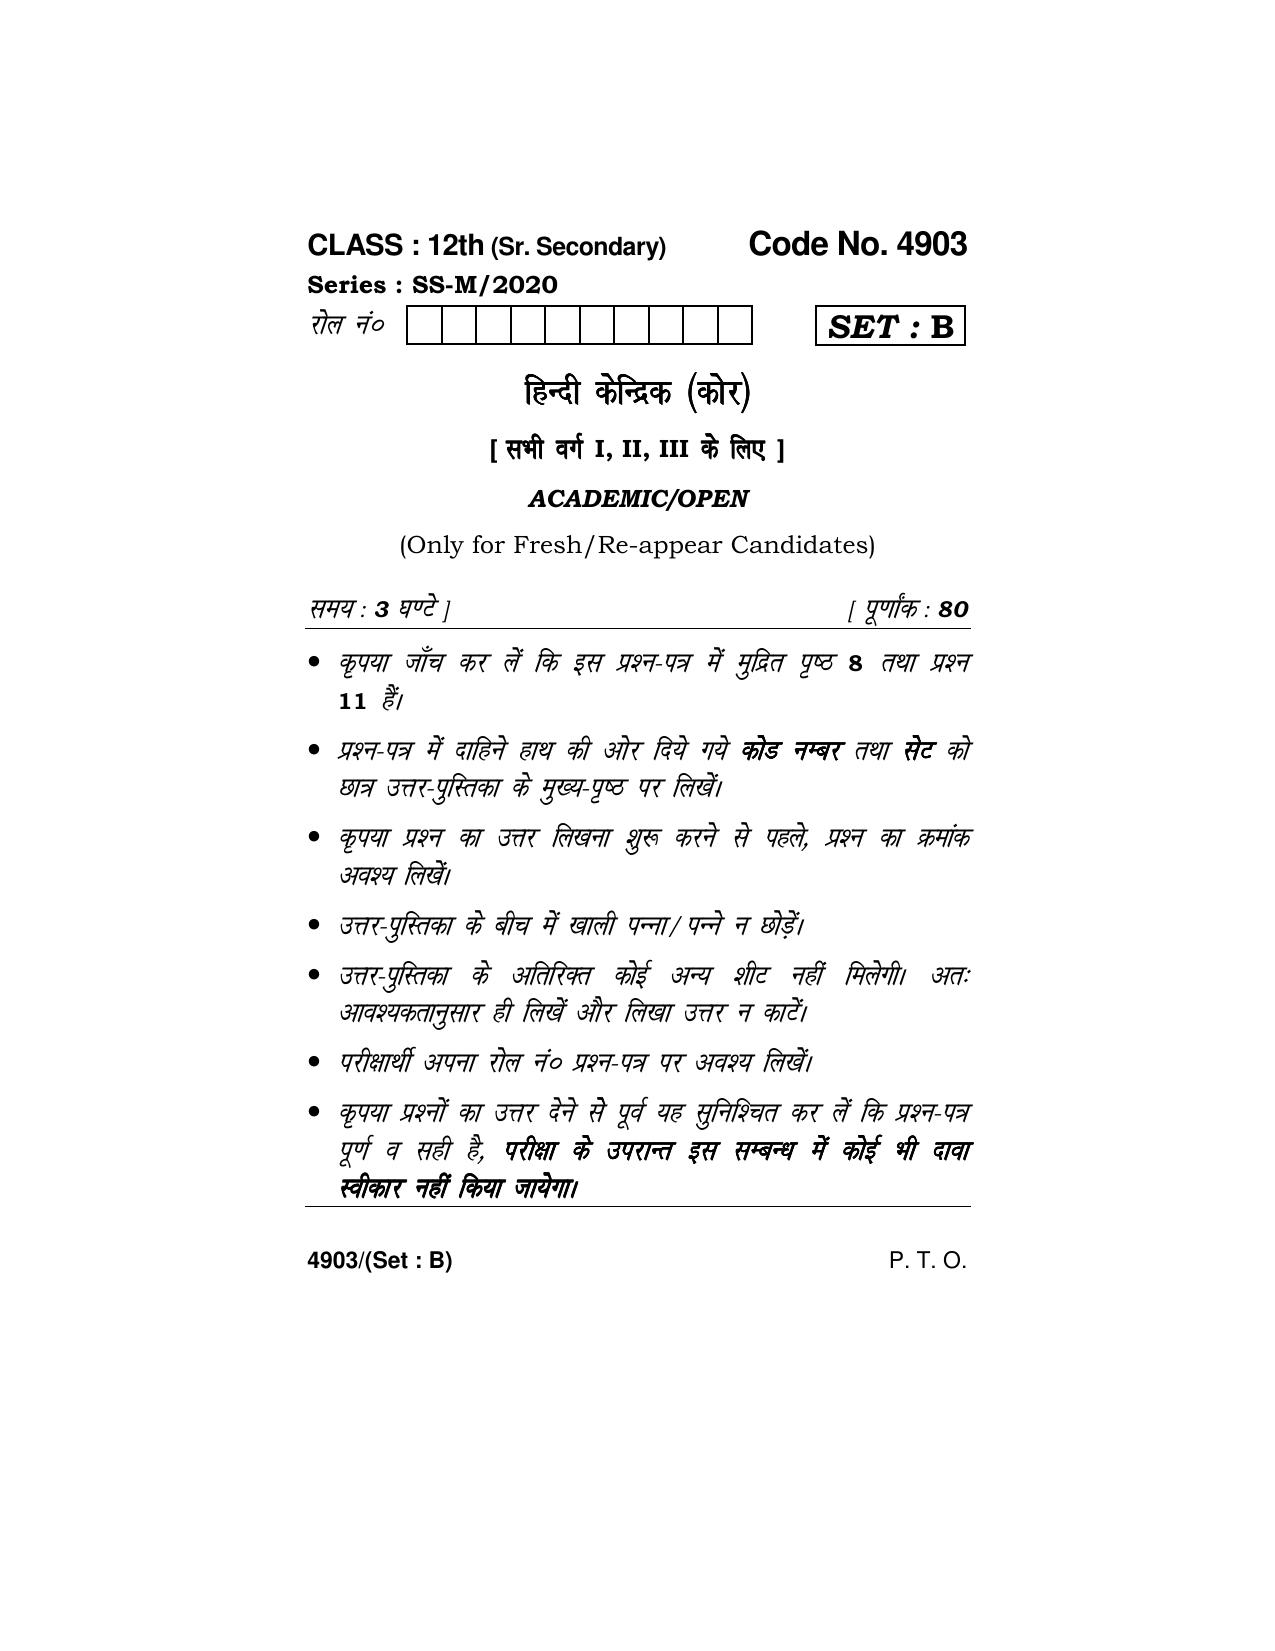 Haryana Board HBSE Class 12 Hindi Core 2020 Question Paper - Page 9